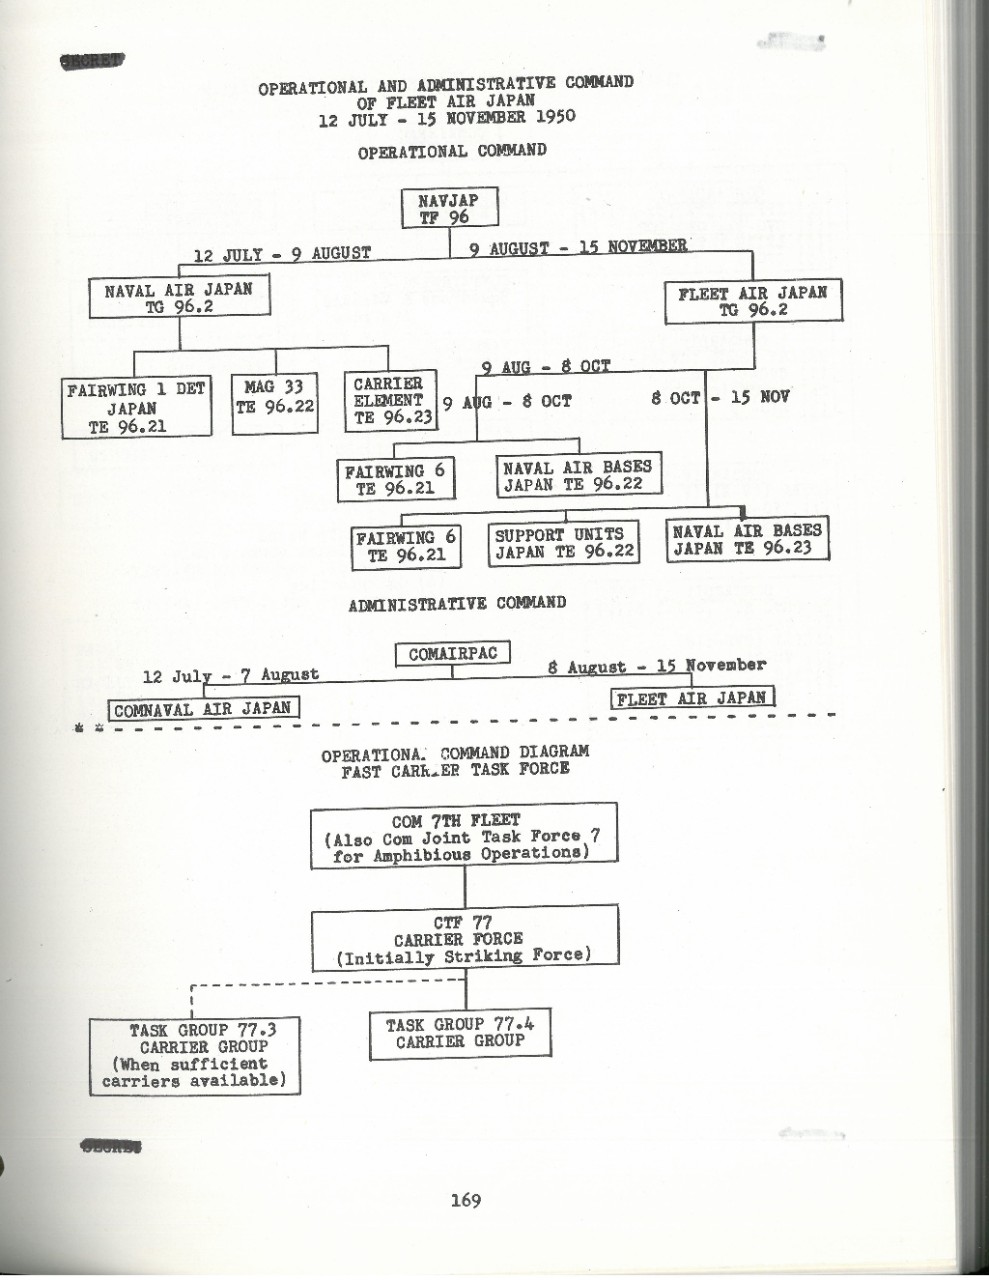 Chart titled "Operational and Administrative Command of Fleet Air Japan 12 July - 15 November 1950. Operational Command.' 